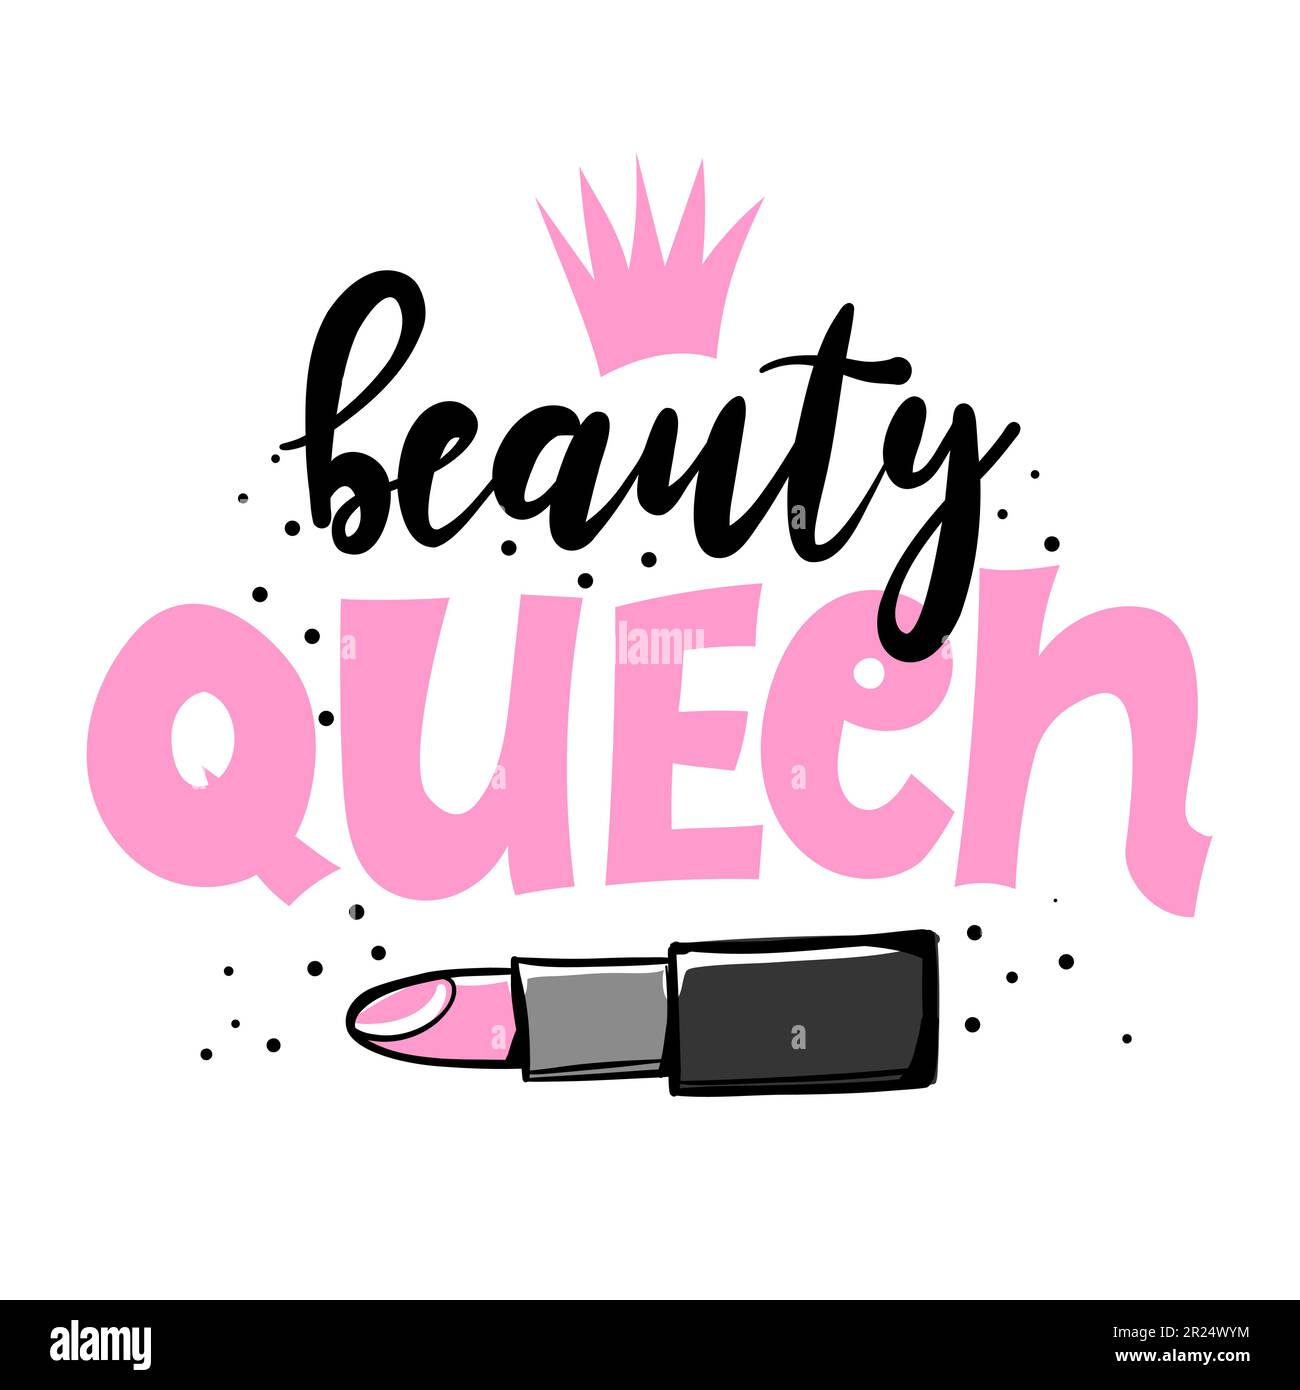 Beauty Queen - Hand drawn typography poster. Conceptual handwritten text. Hand letter script word art design. Good for pajamas, posters, greeting card Stock Vector